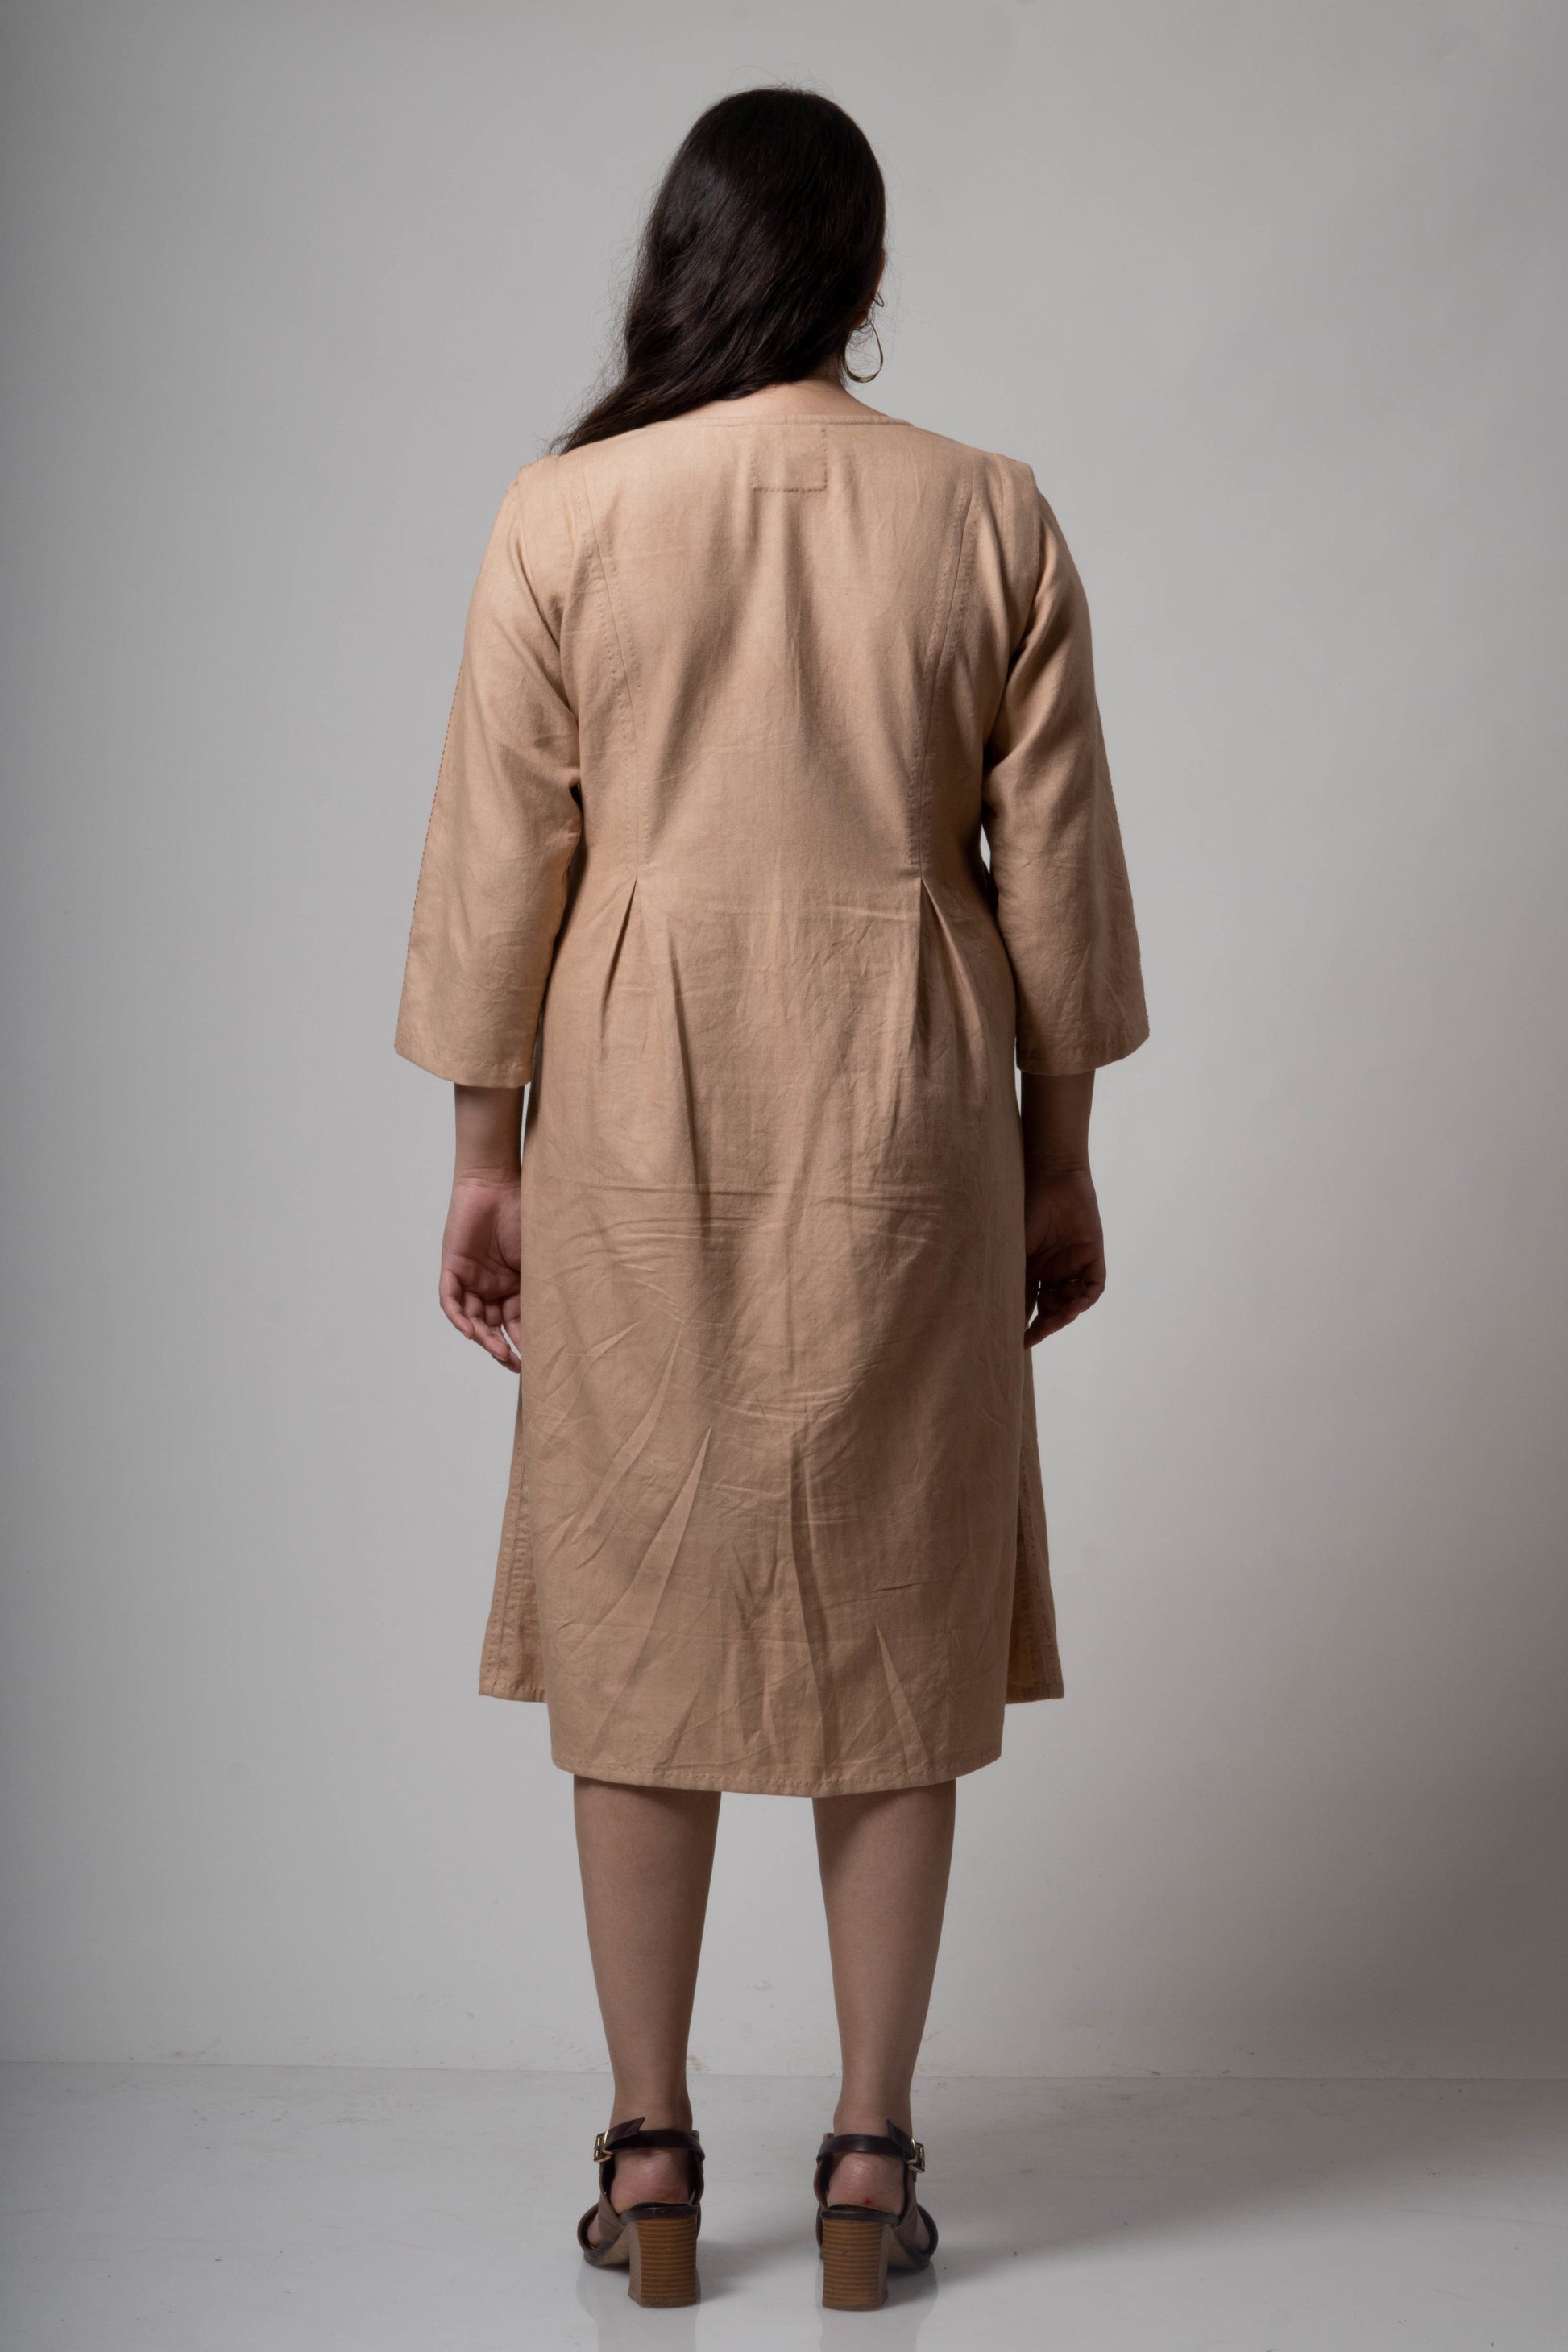 Brown Midi Dress by Lafaani with Brown, Casual Wear, Cotton, fall, Midi Dresses, Natural, Regular Fit, Solids, The Way You Look by Lafaani, Womenswear at Kamakhyaa for sustainable fashion